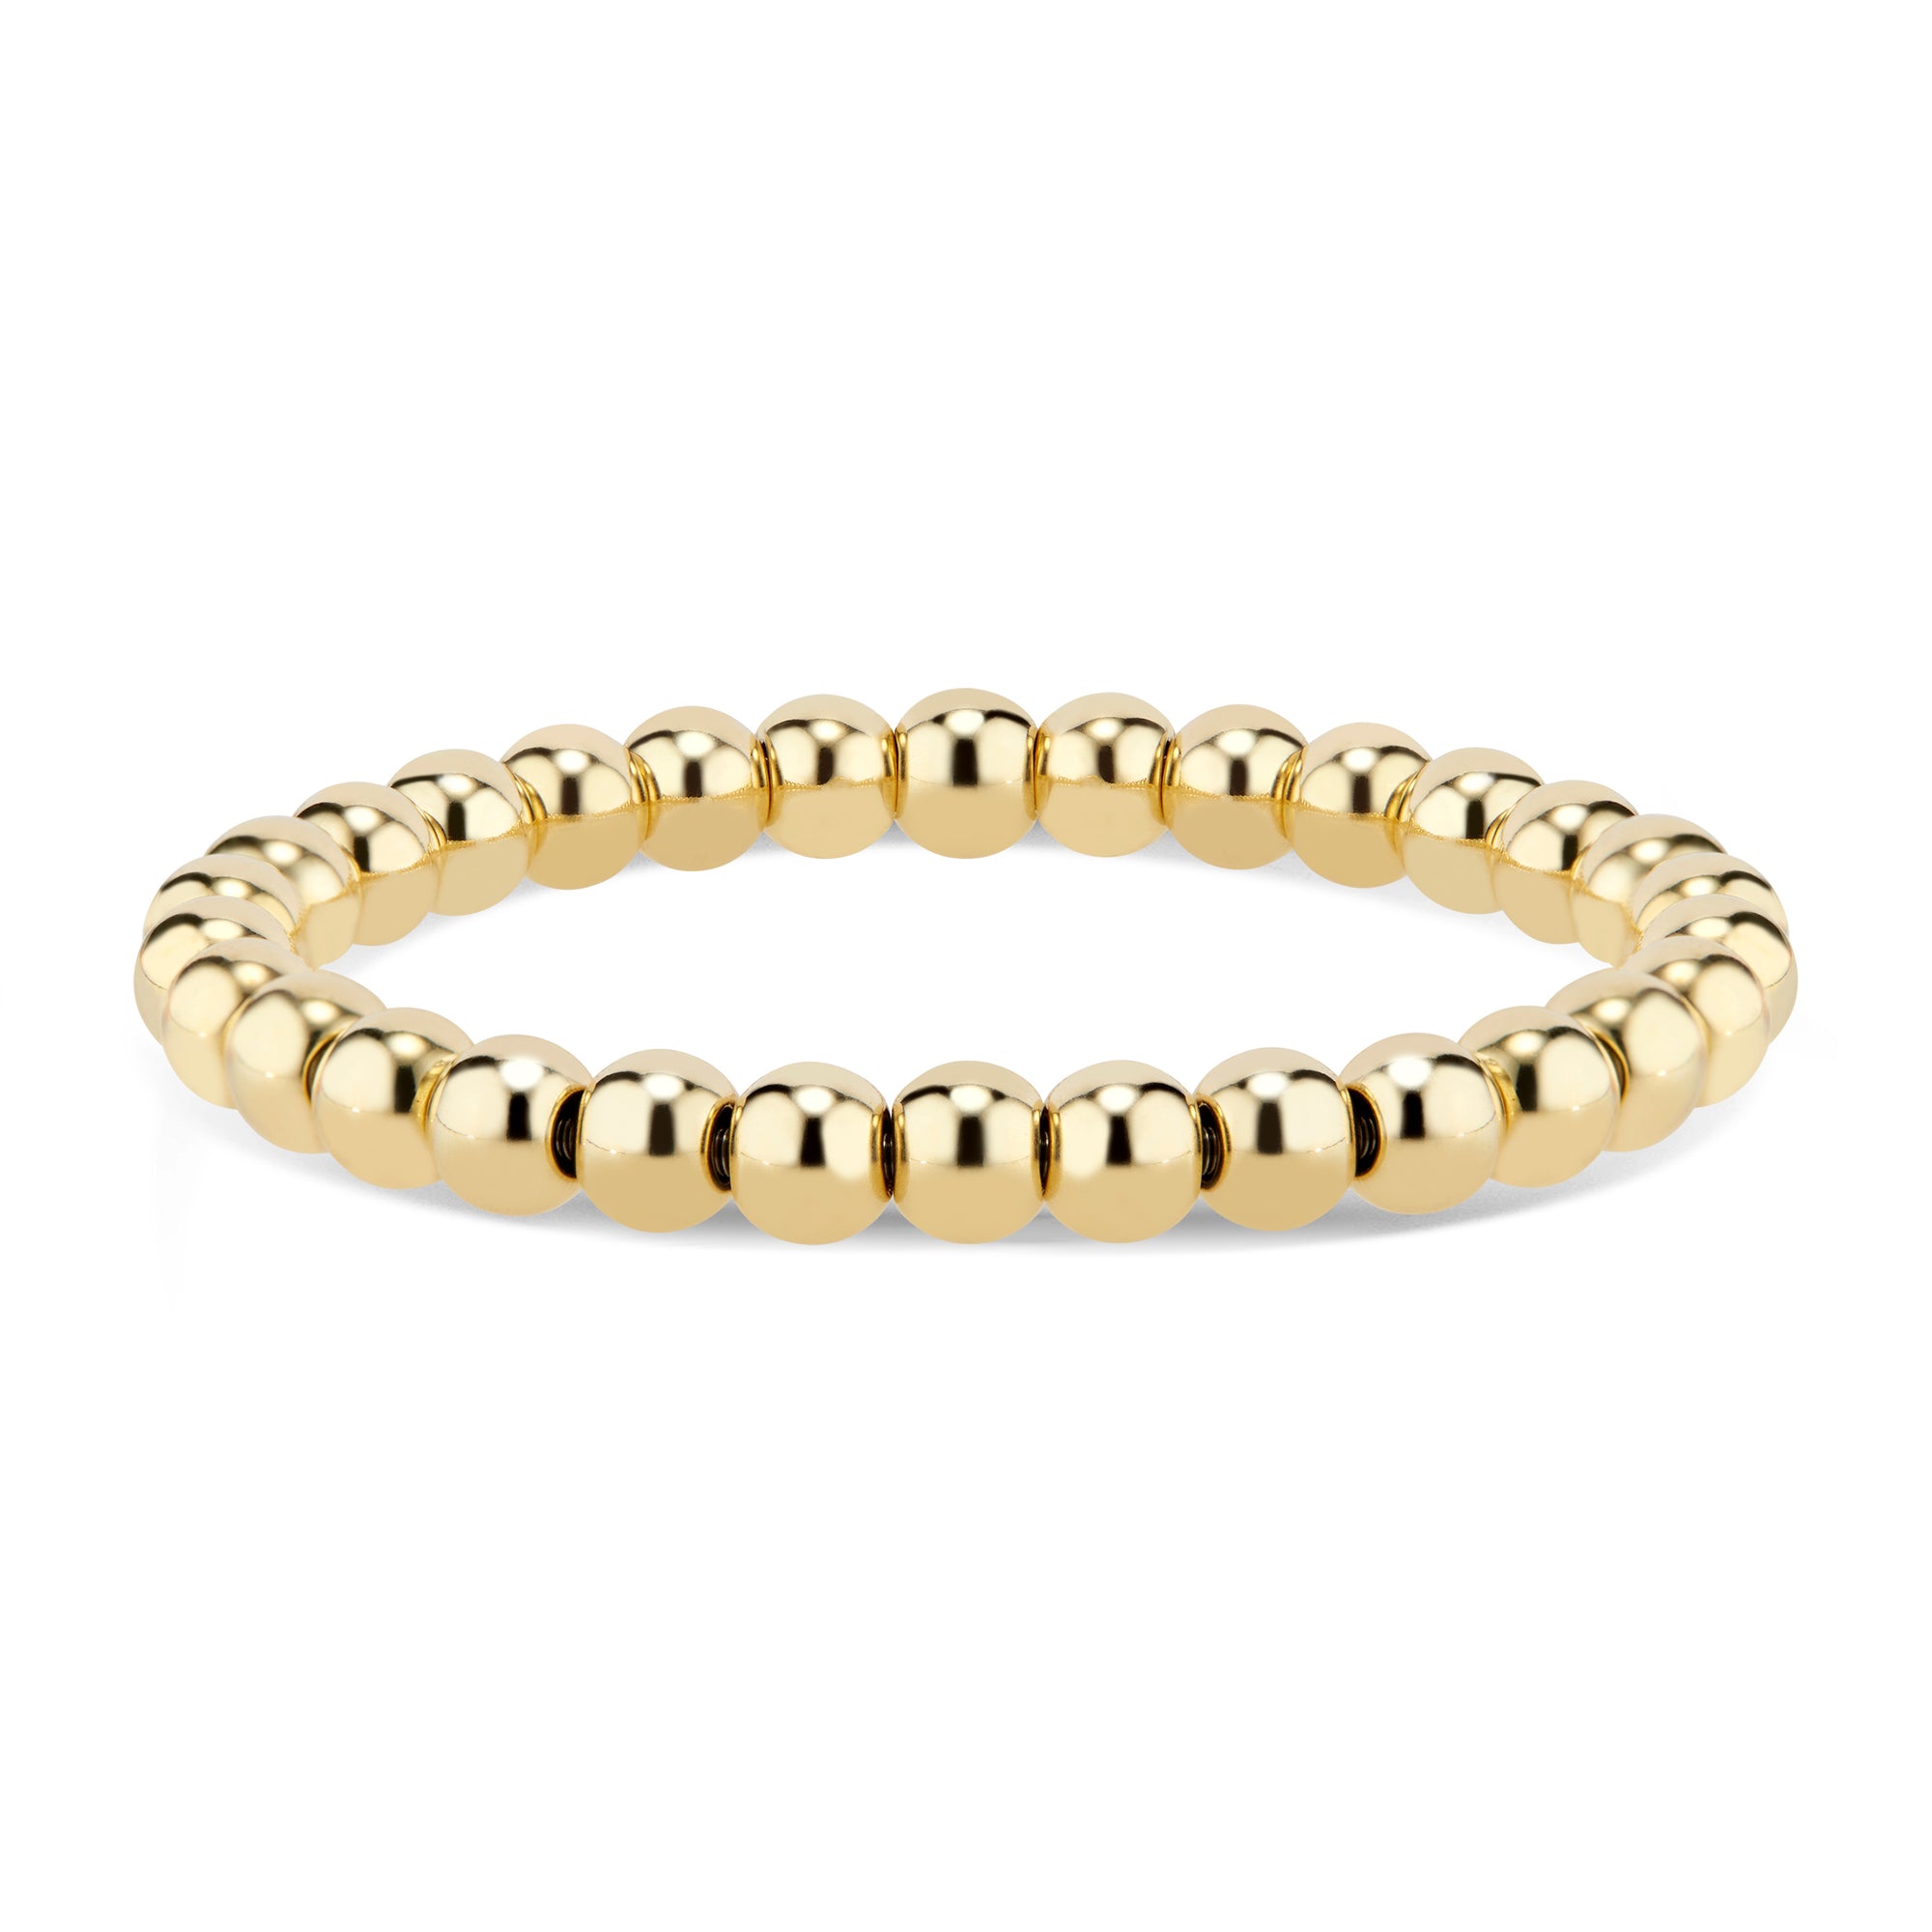 Gold Large Bead Stretch Bracelet - 7MM beads - 18K yellow gold weighing 7.05 grams